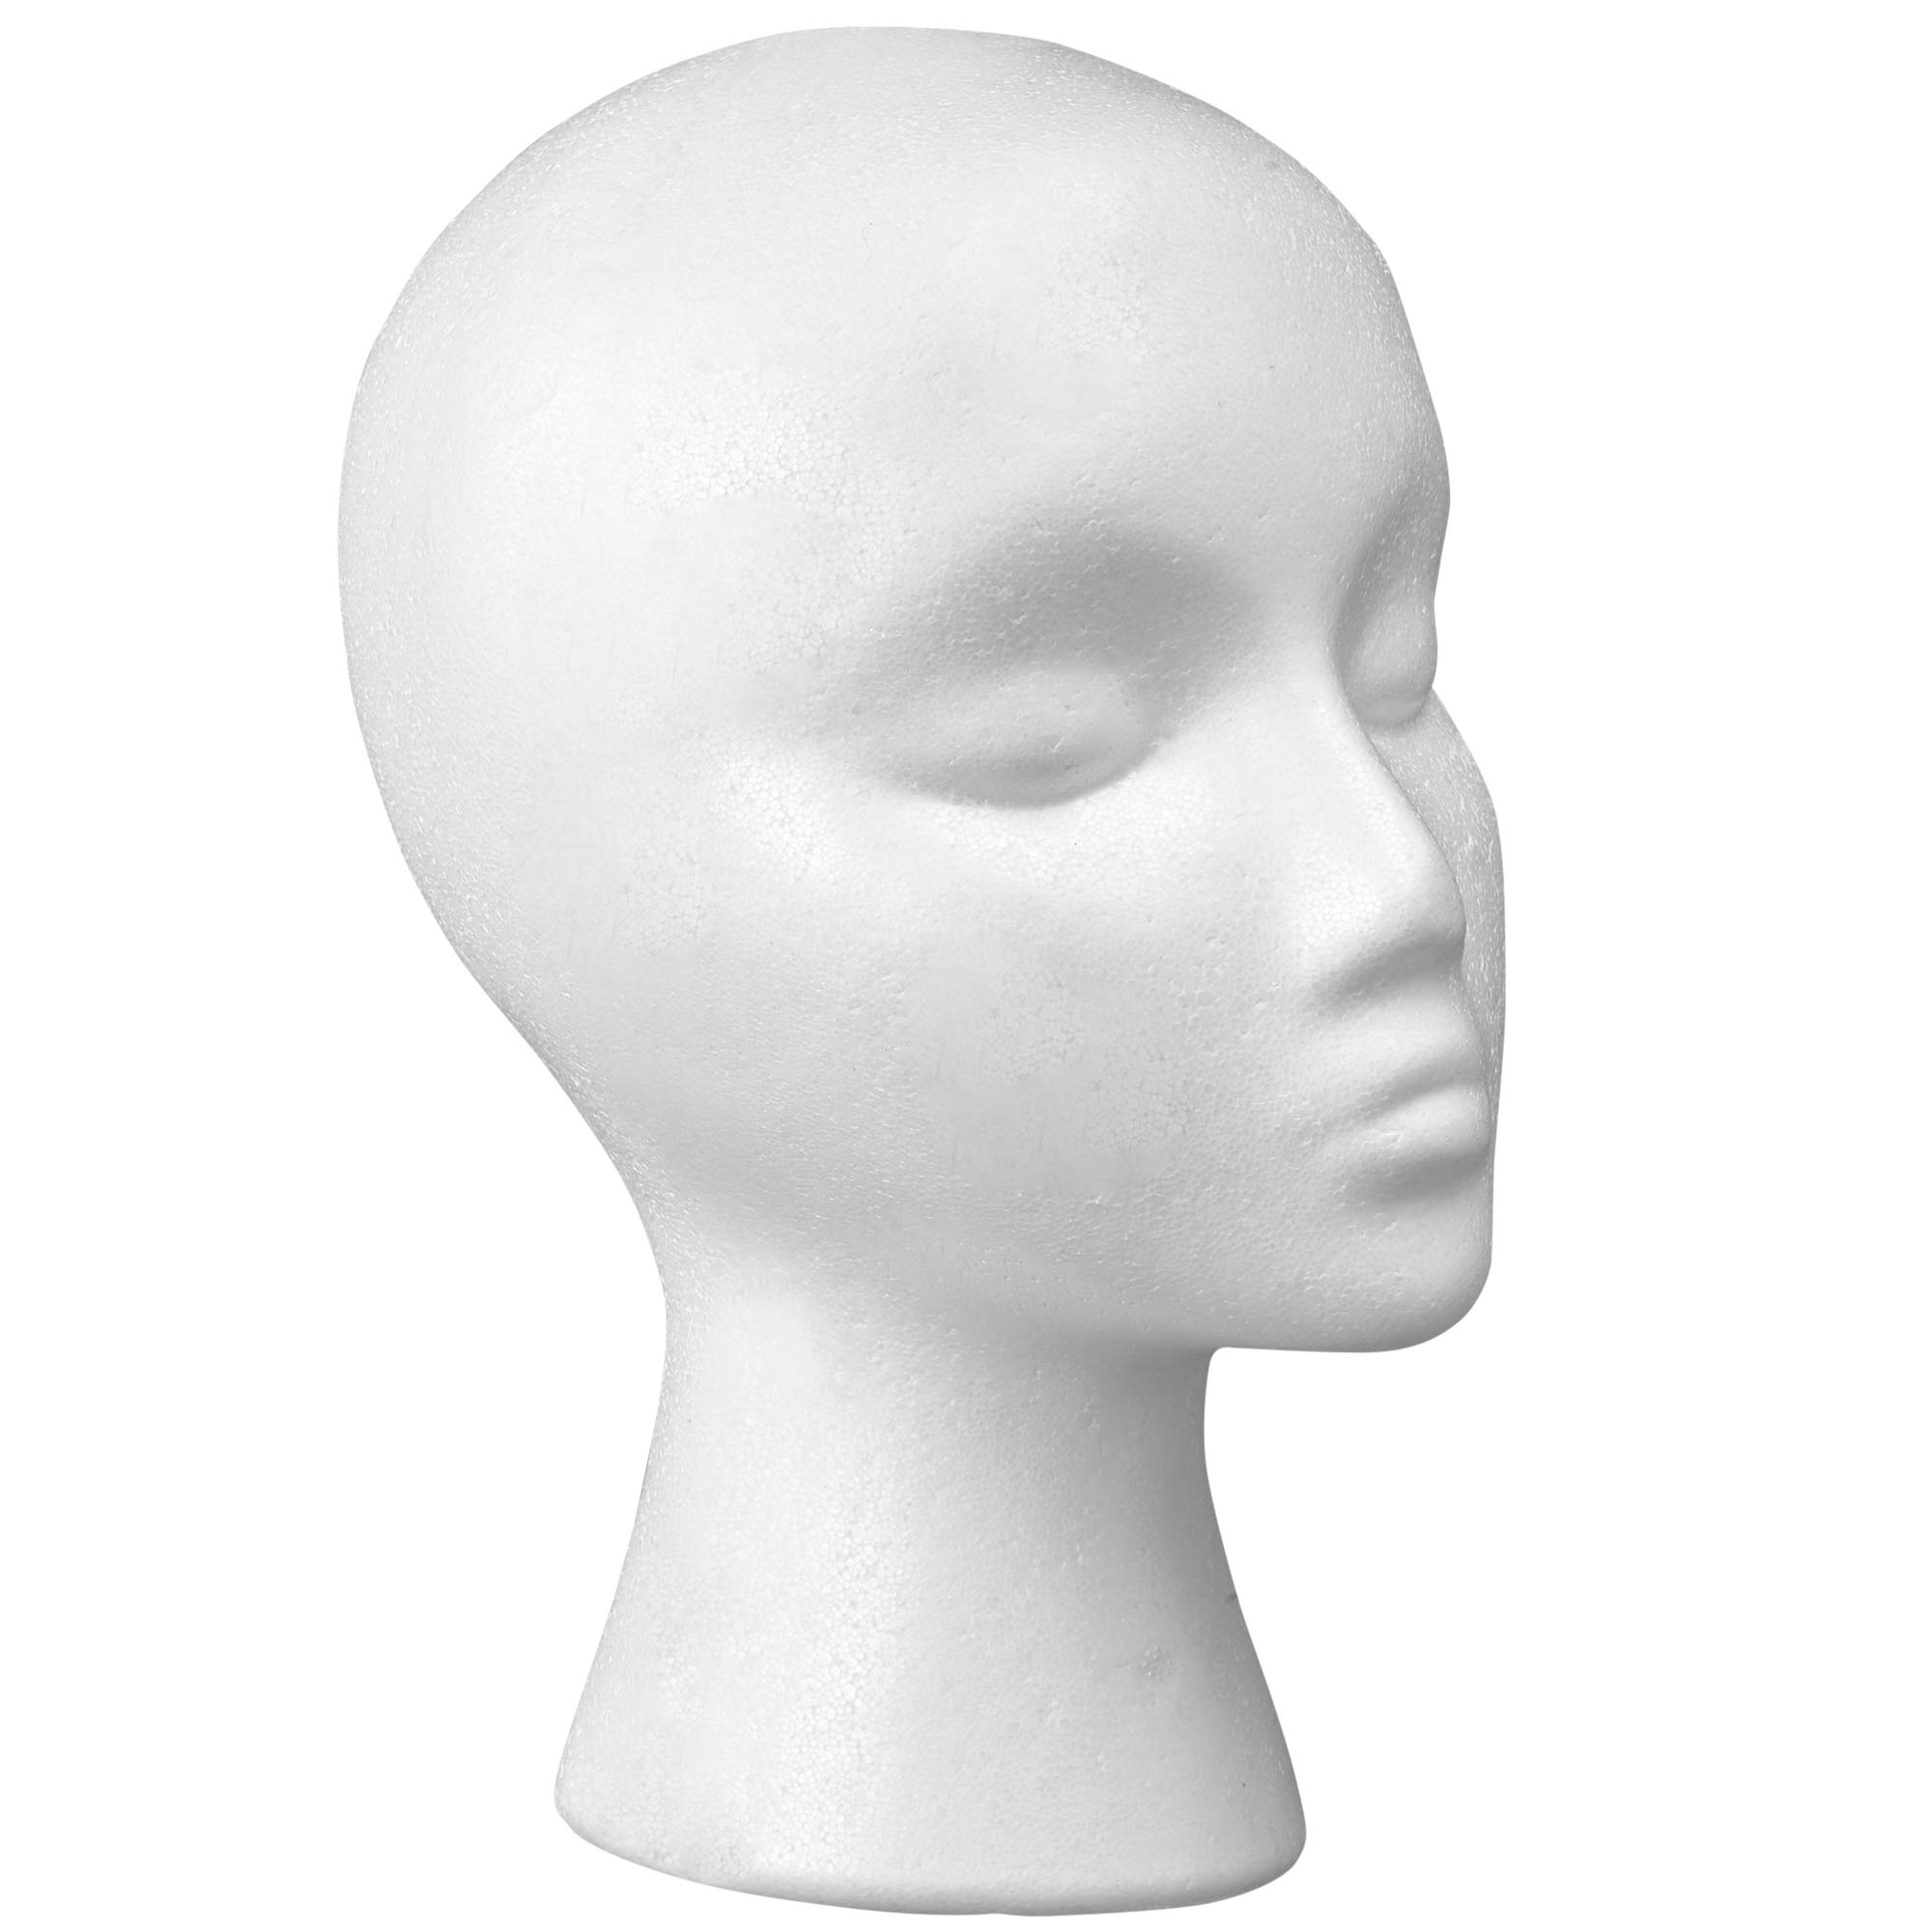 12 Styrofoam Wig Head - Tall Female Foam Mannequin Wig Stand and